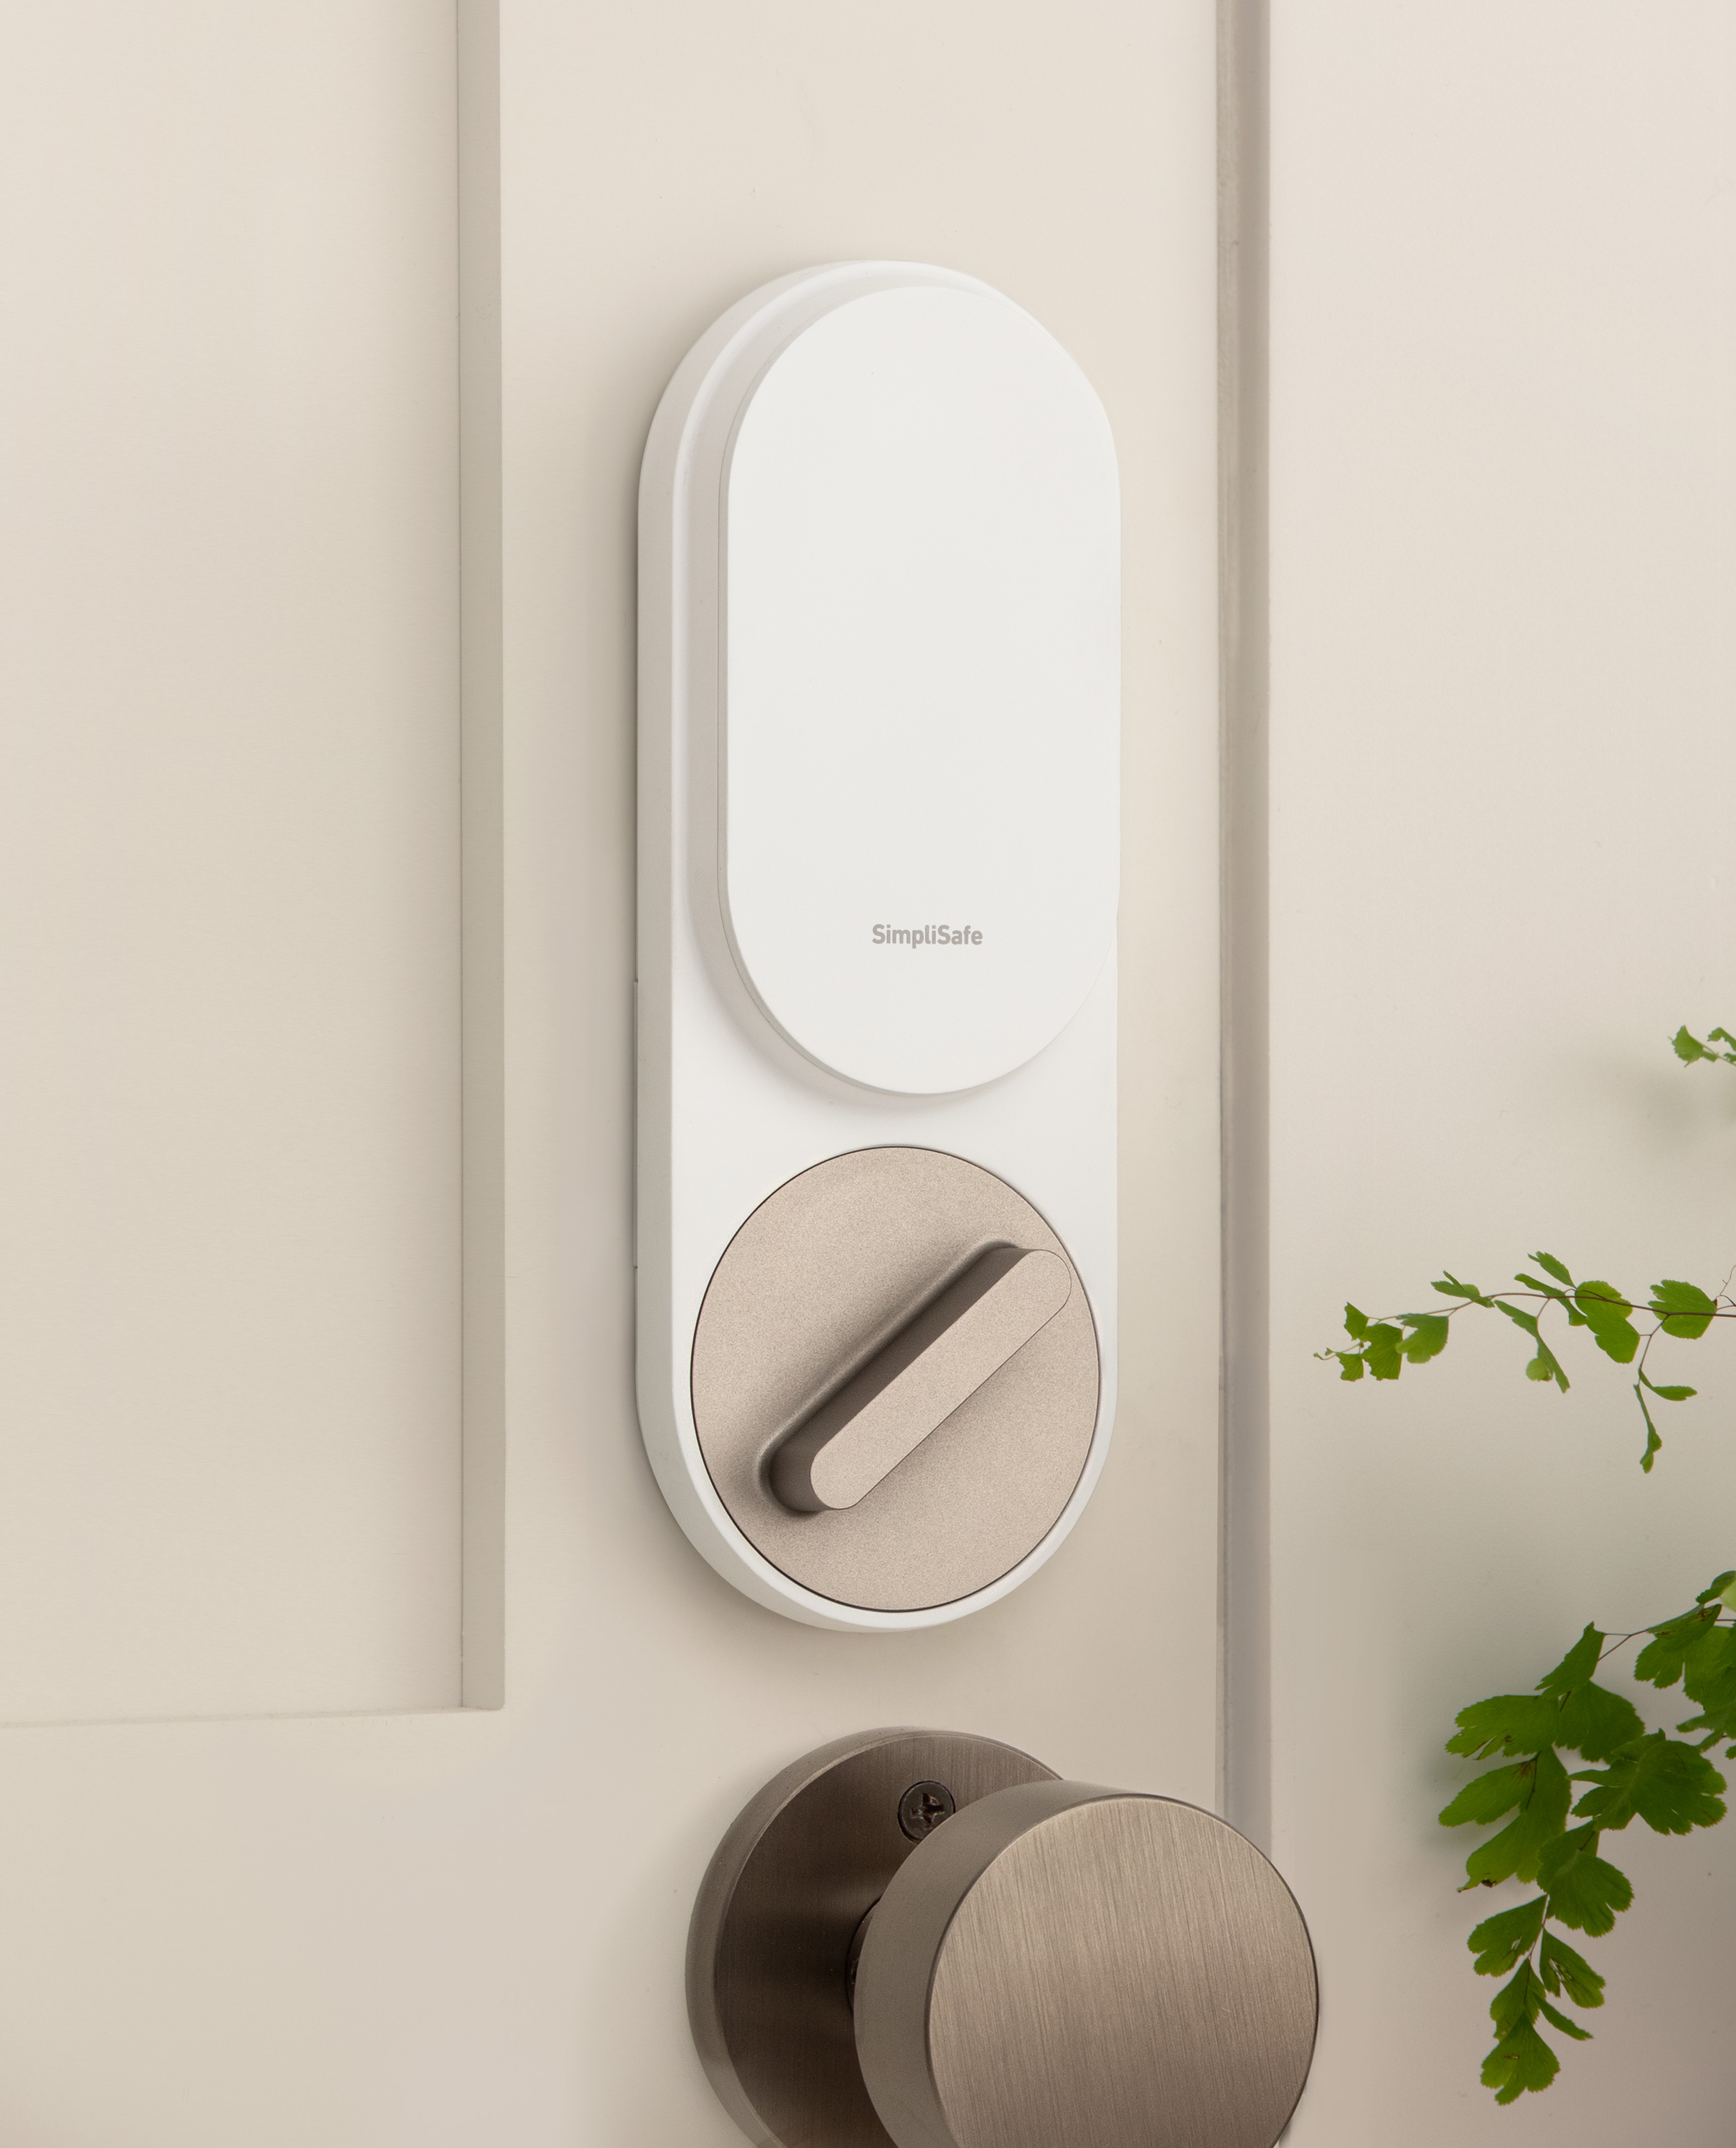 A SimpliSafe smart lock above a door knob on a white door with a green fern nearby.